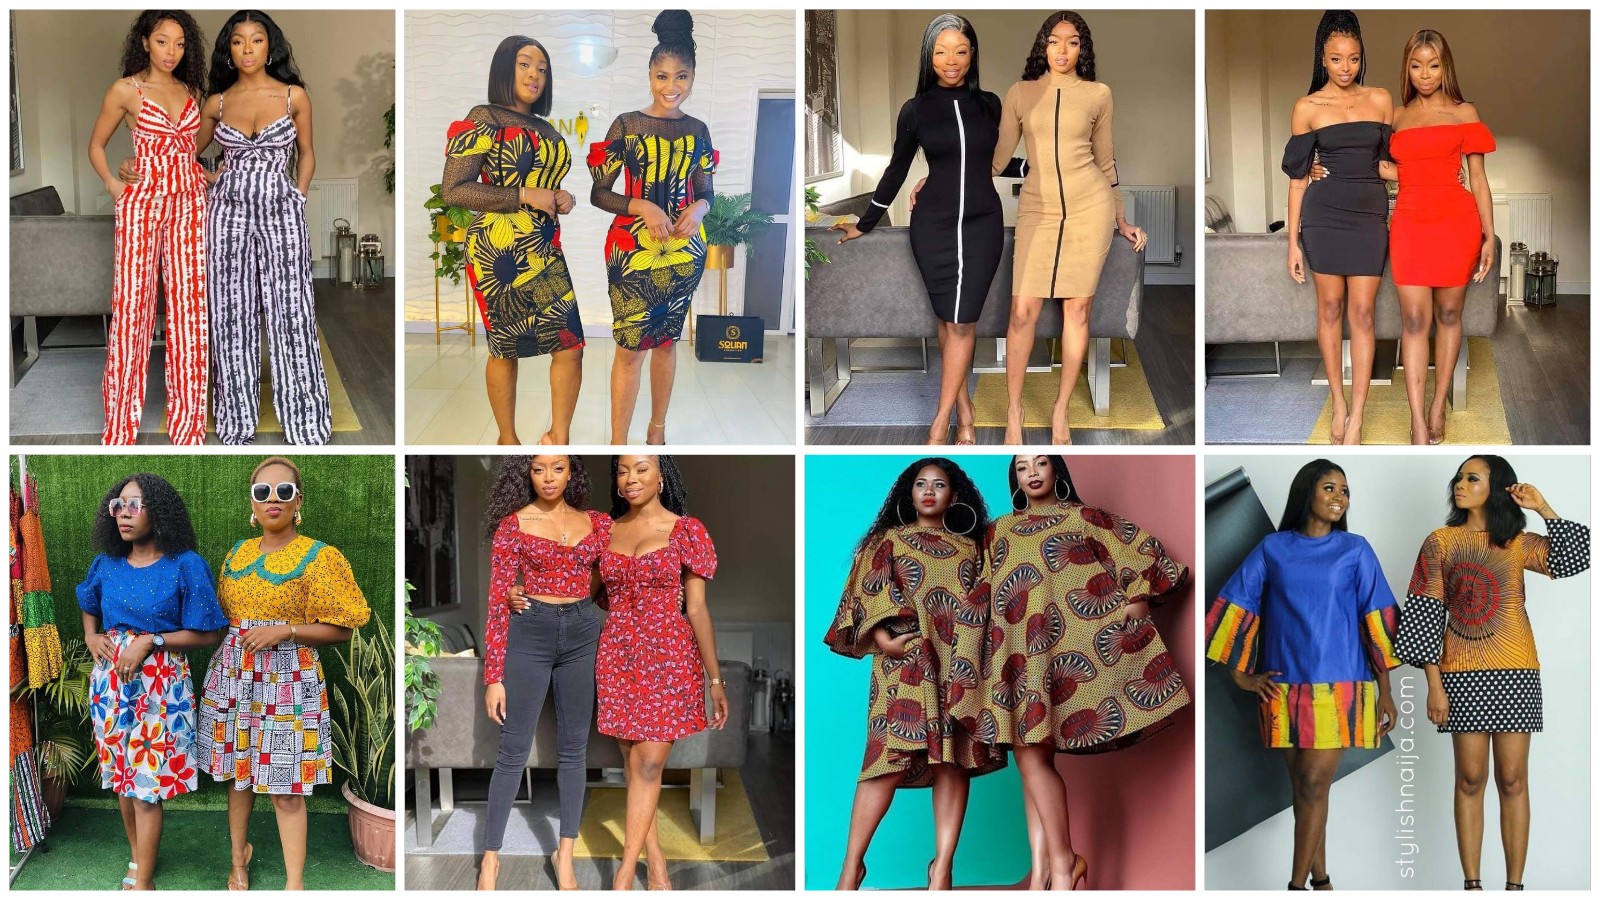 Fascinating Styles For Classy Twinnings and Friends That Slay Together ...